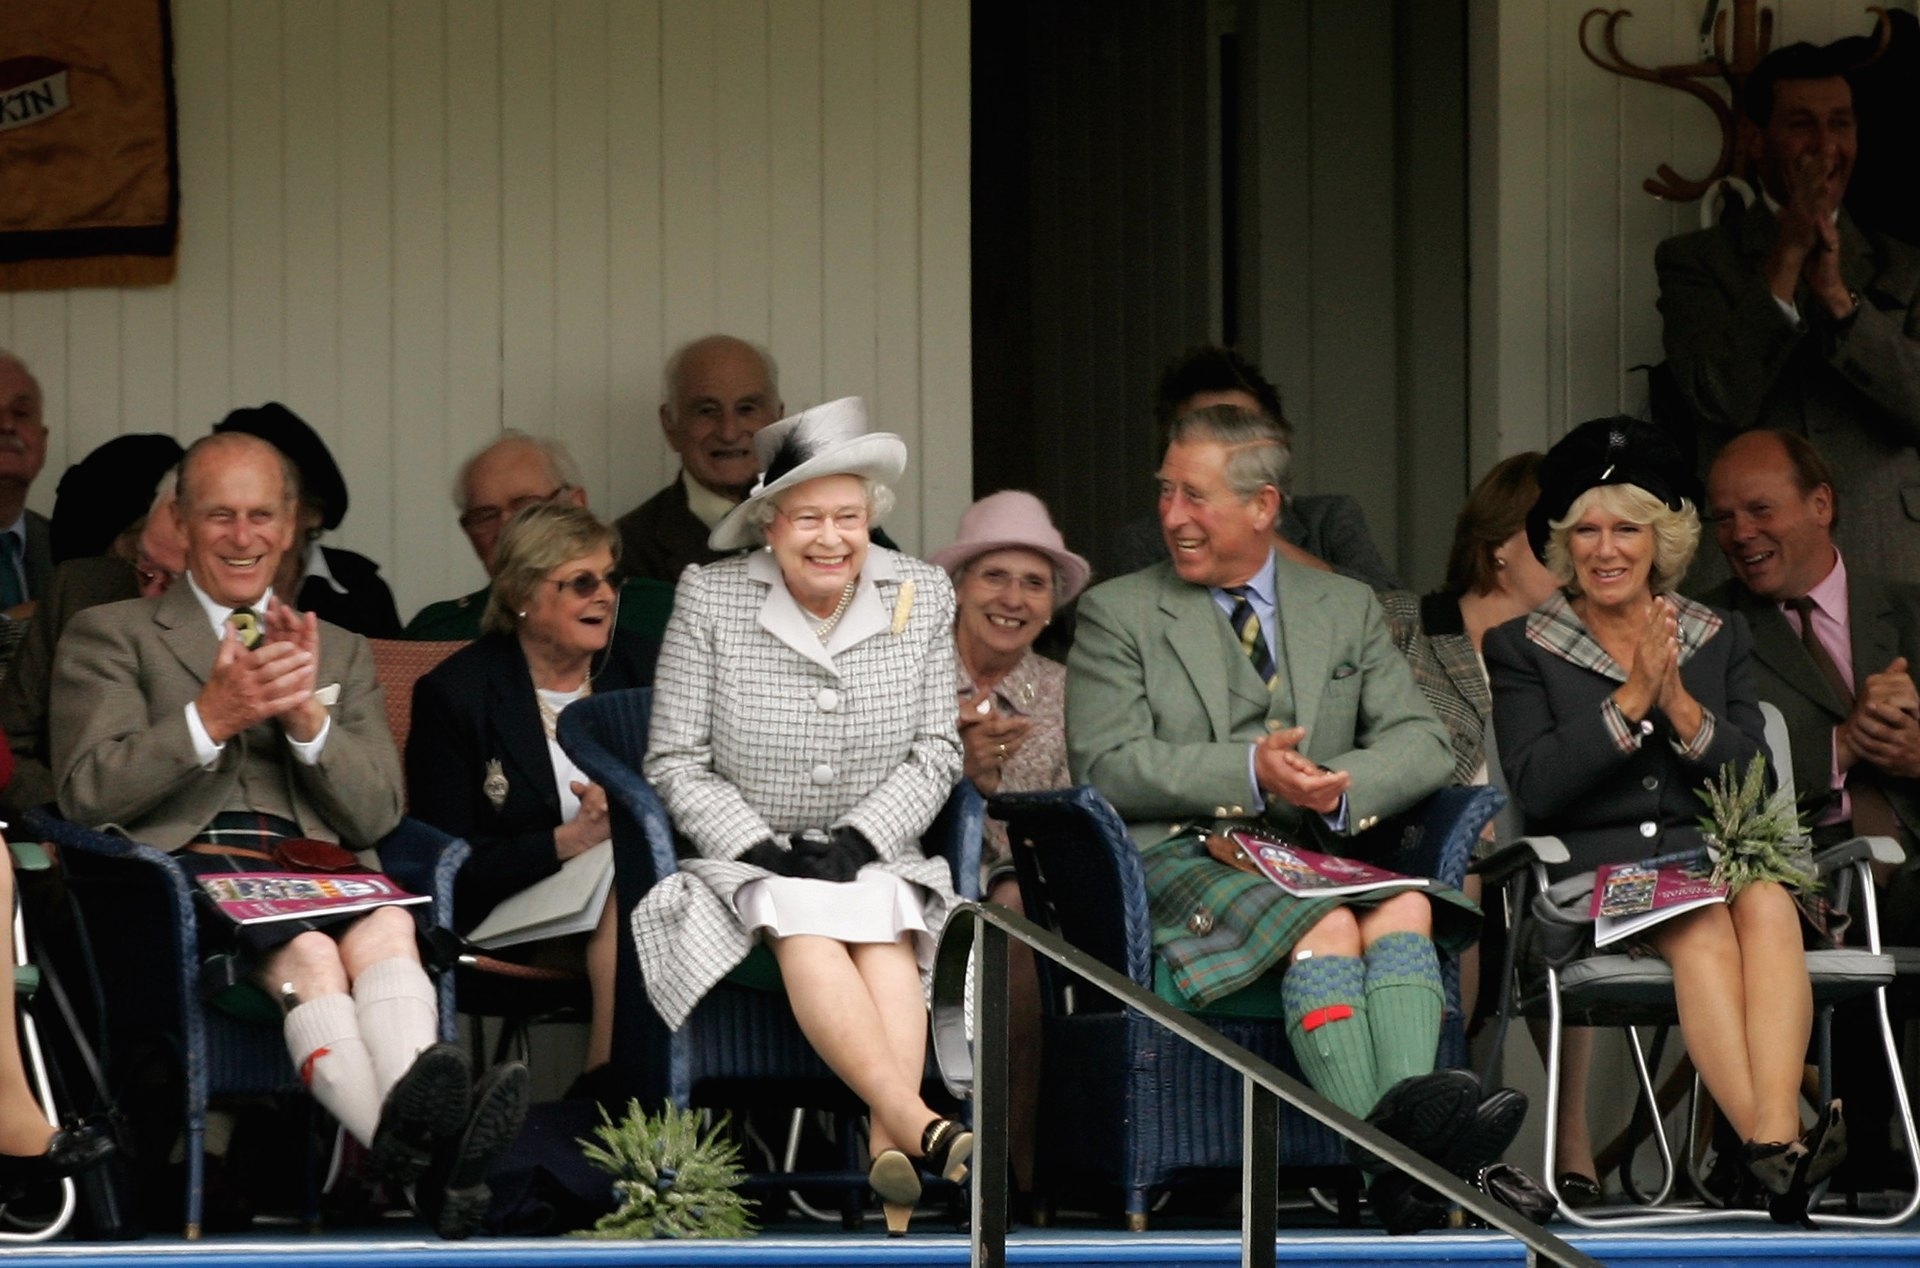 BRAEMAR, UNITED KINGDOM - SEPTEMBER 02:  (L-R) Prince Philip, Duke of Edinburgh, Queen Elizabeth II, Prince Charles, The Prince of Wales and Camilla, Duchess of Cornwall watch the children's sack race during the Braemar Gathering at the Princess Royal and Duke of Fife Memorial Park on September 2, 2006 